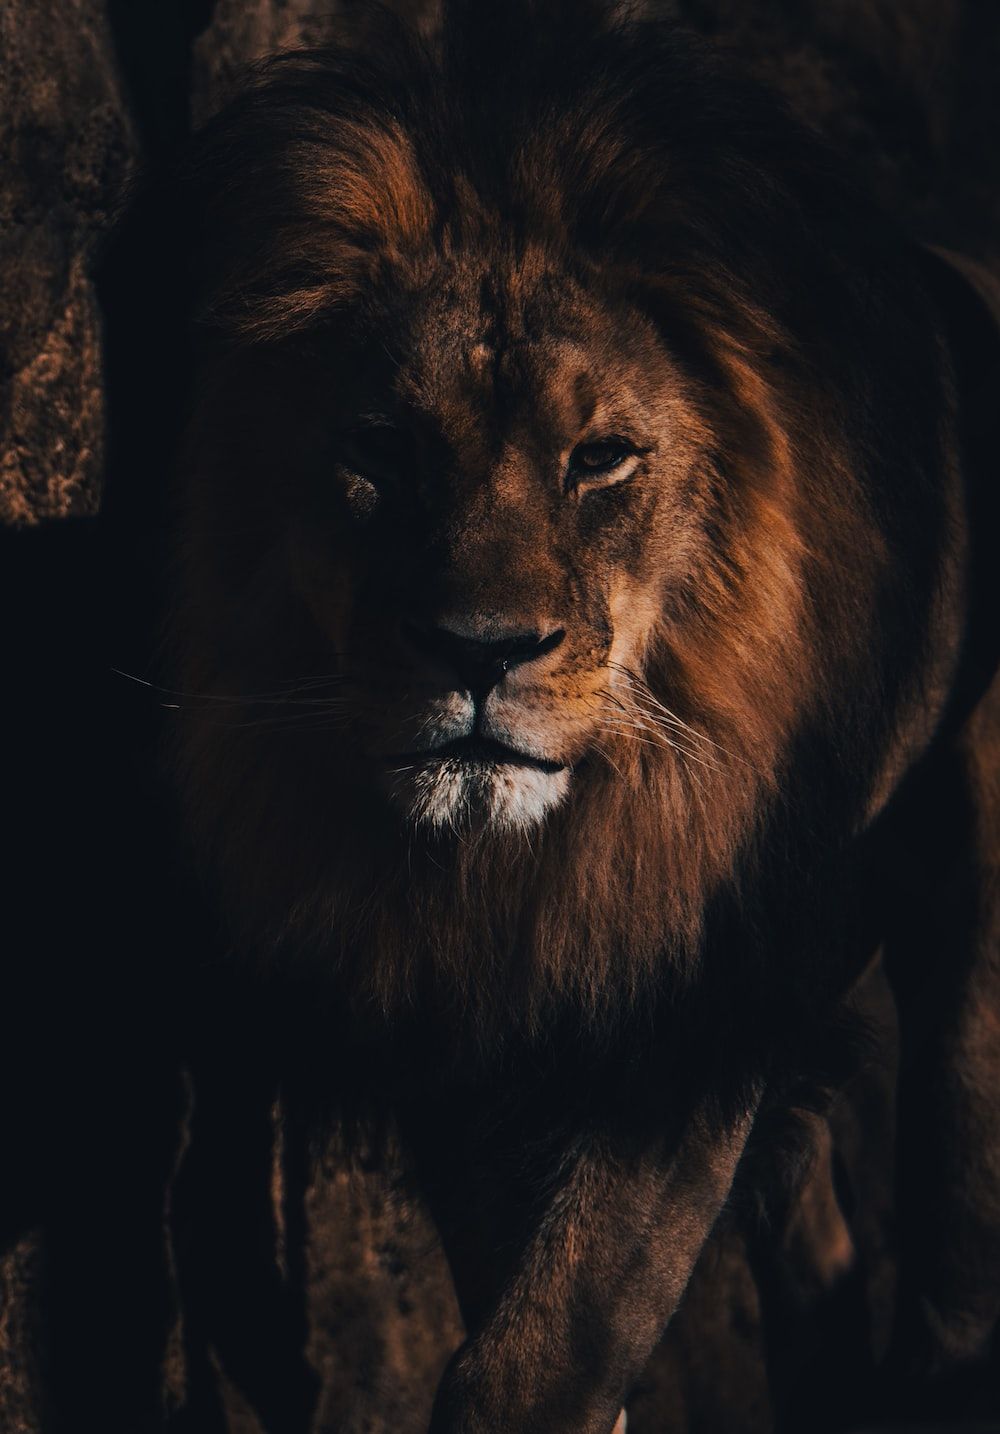 Lion Picture & Image. Download Free Image